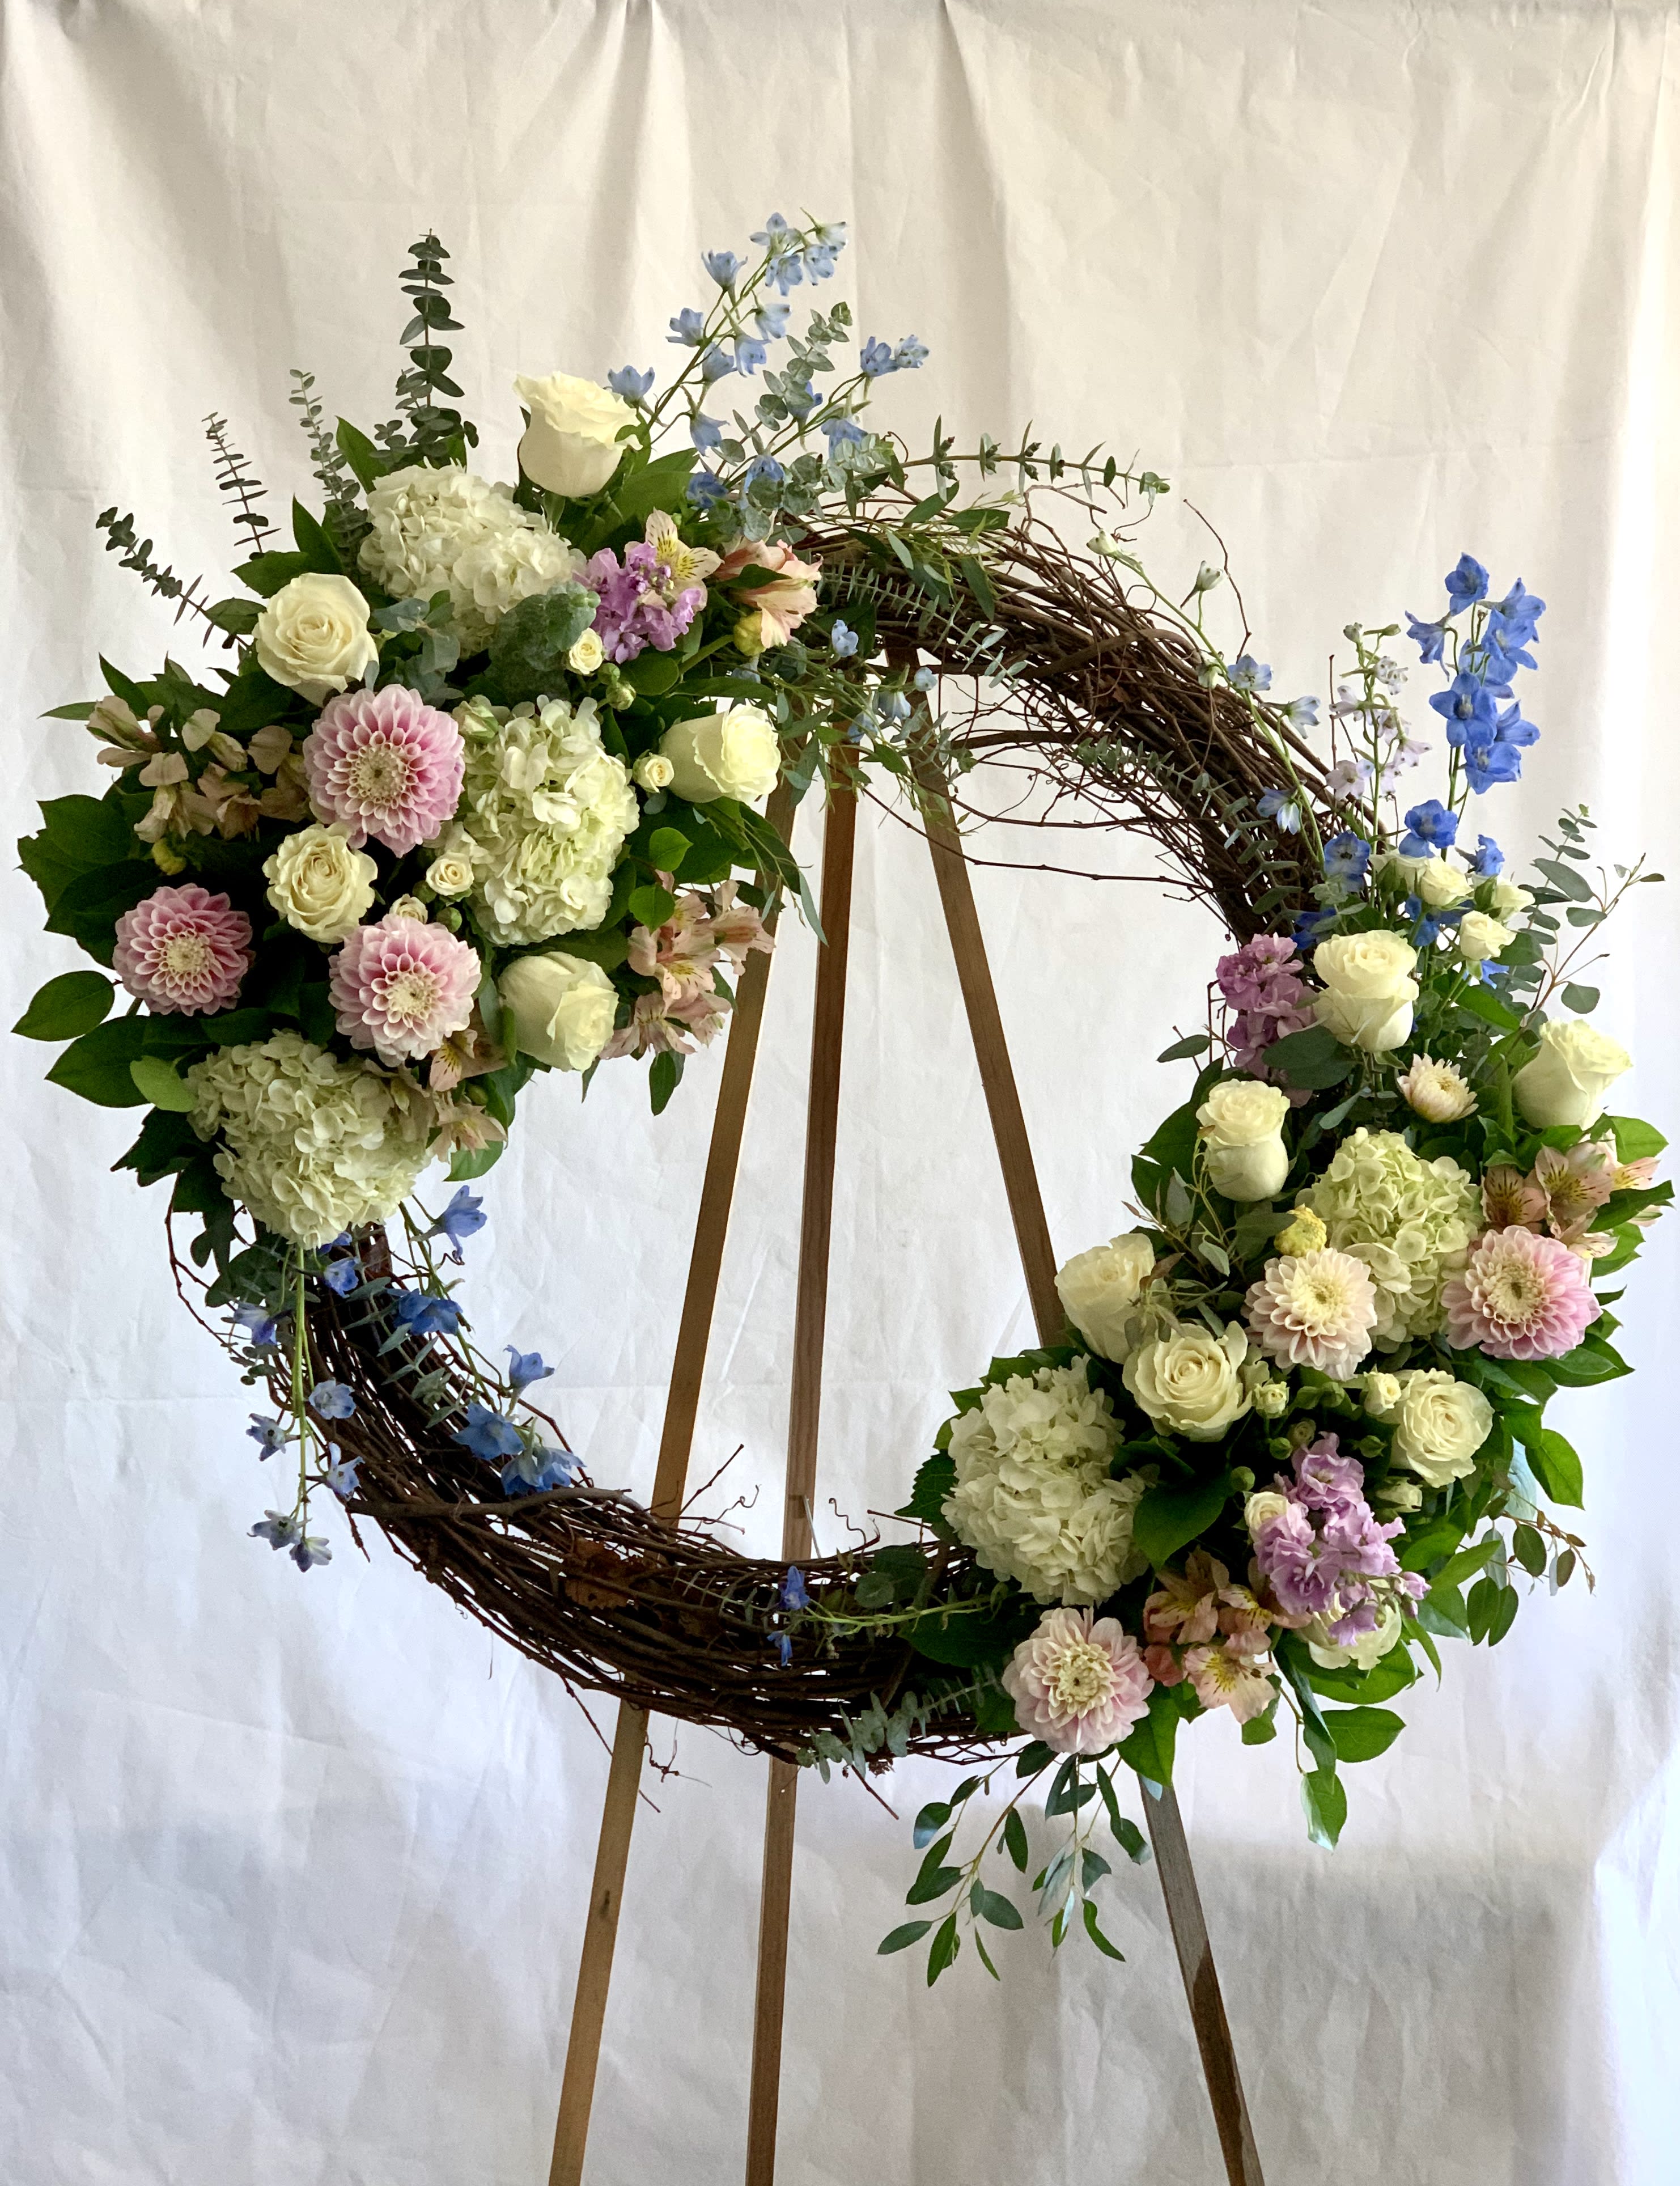 Curly Willow Remembrance - A designers choice of your preferred colors woven into a natural tree branch wreath.  Picture reflects Deluxe version.  Please specify preferred color palette in the special instructions.